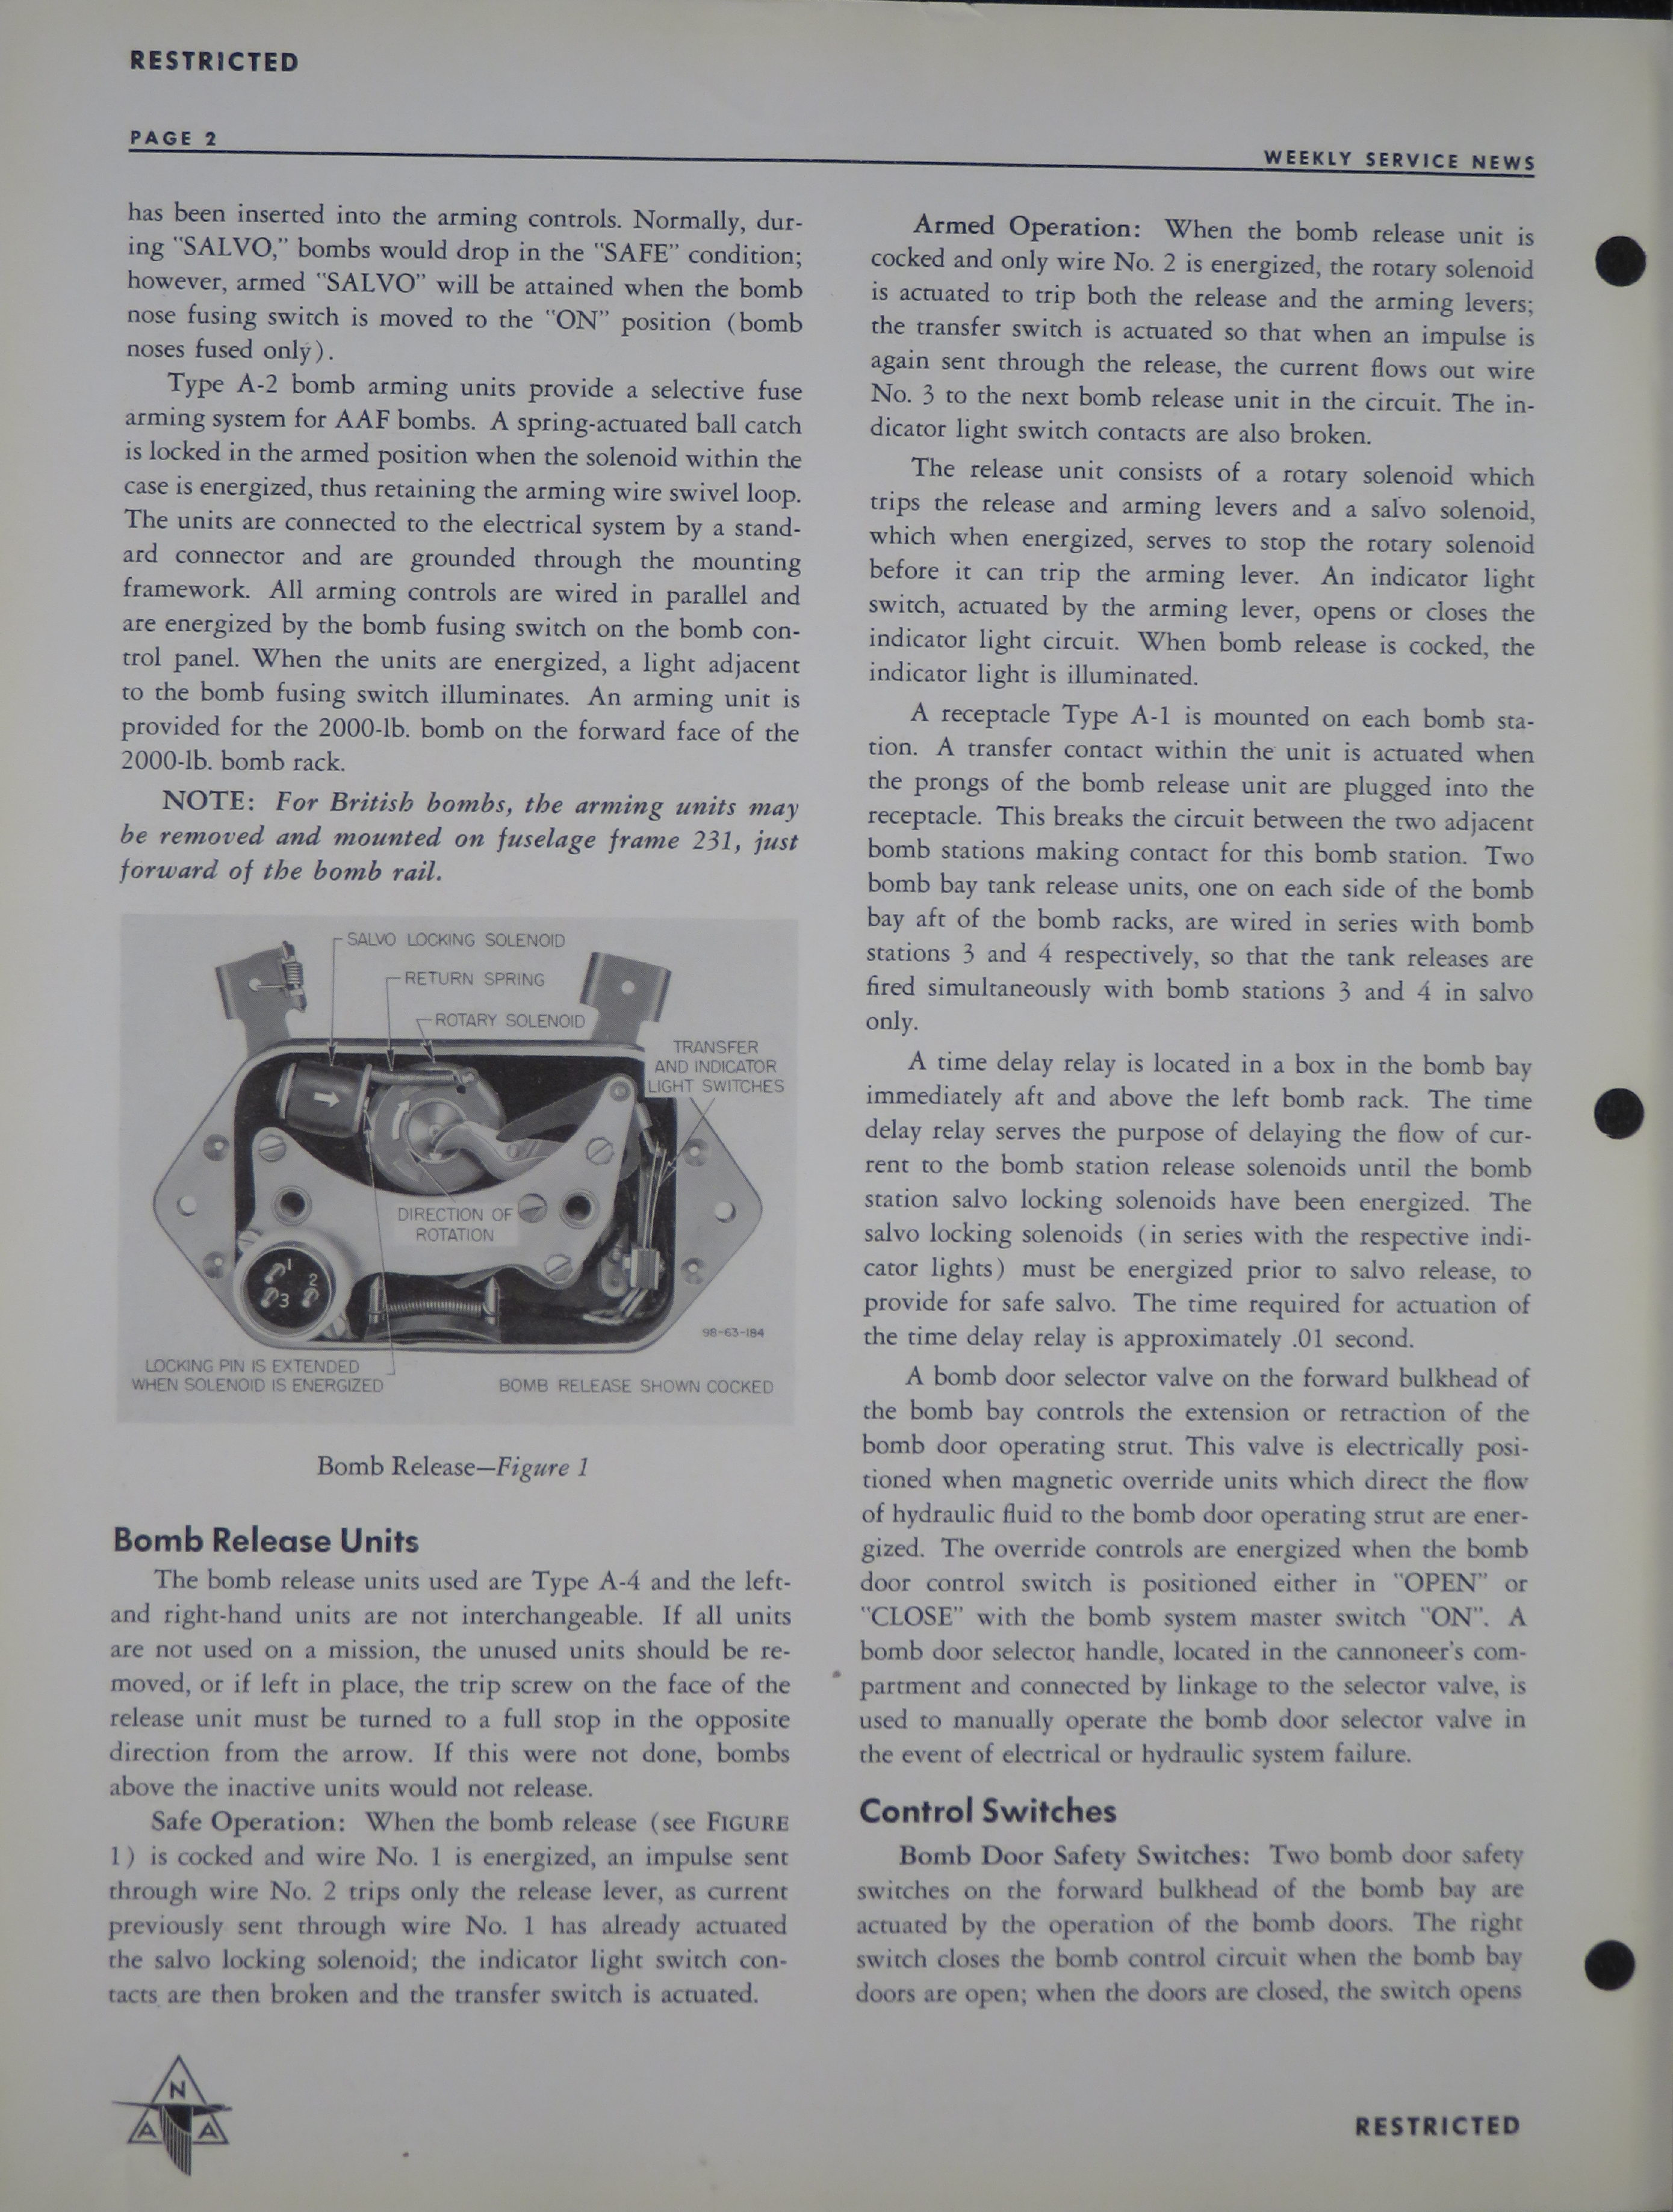 Sample page 2 from AirCorps Library document: Volume 2, No. 15 - Weekly Service News